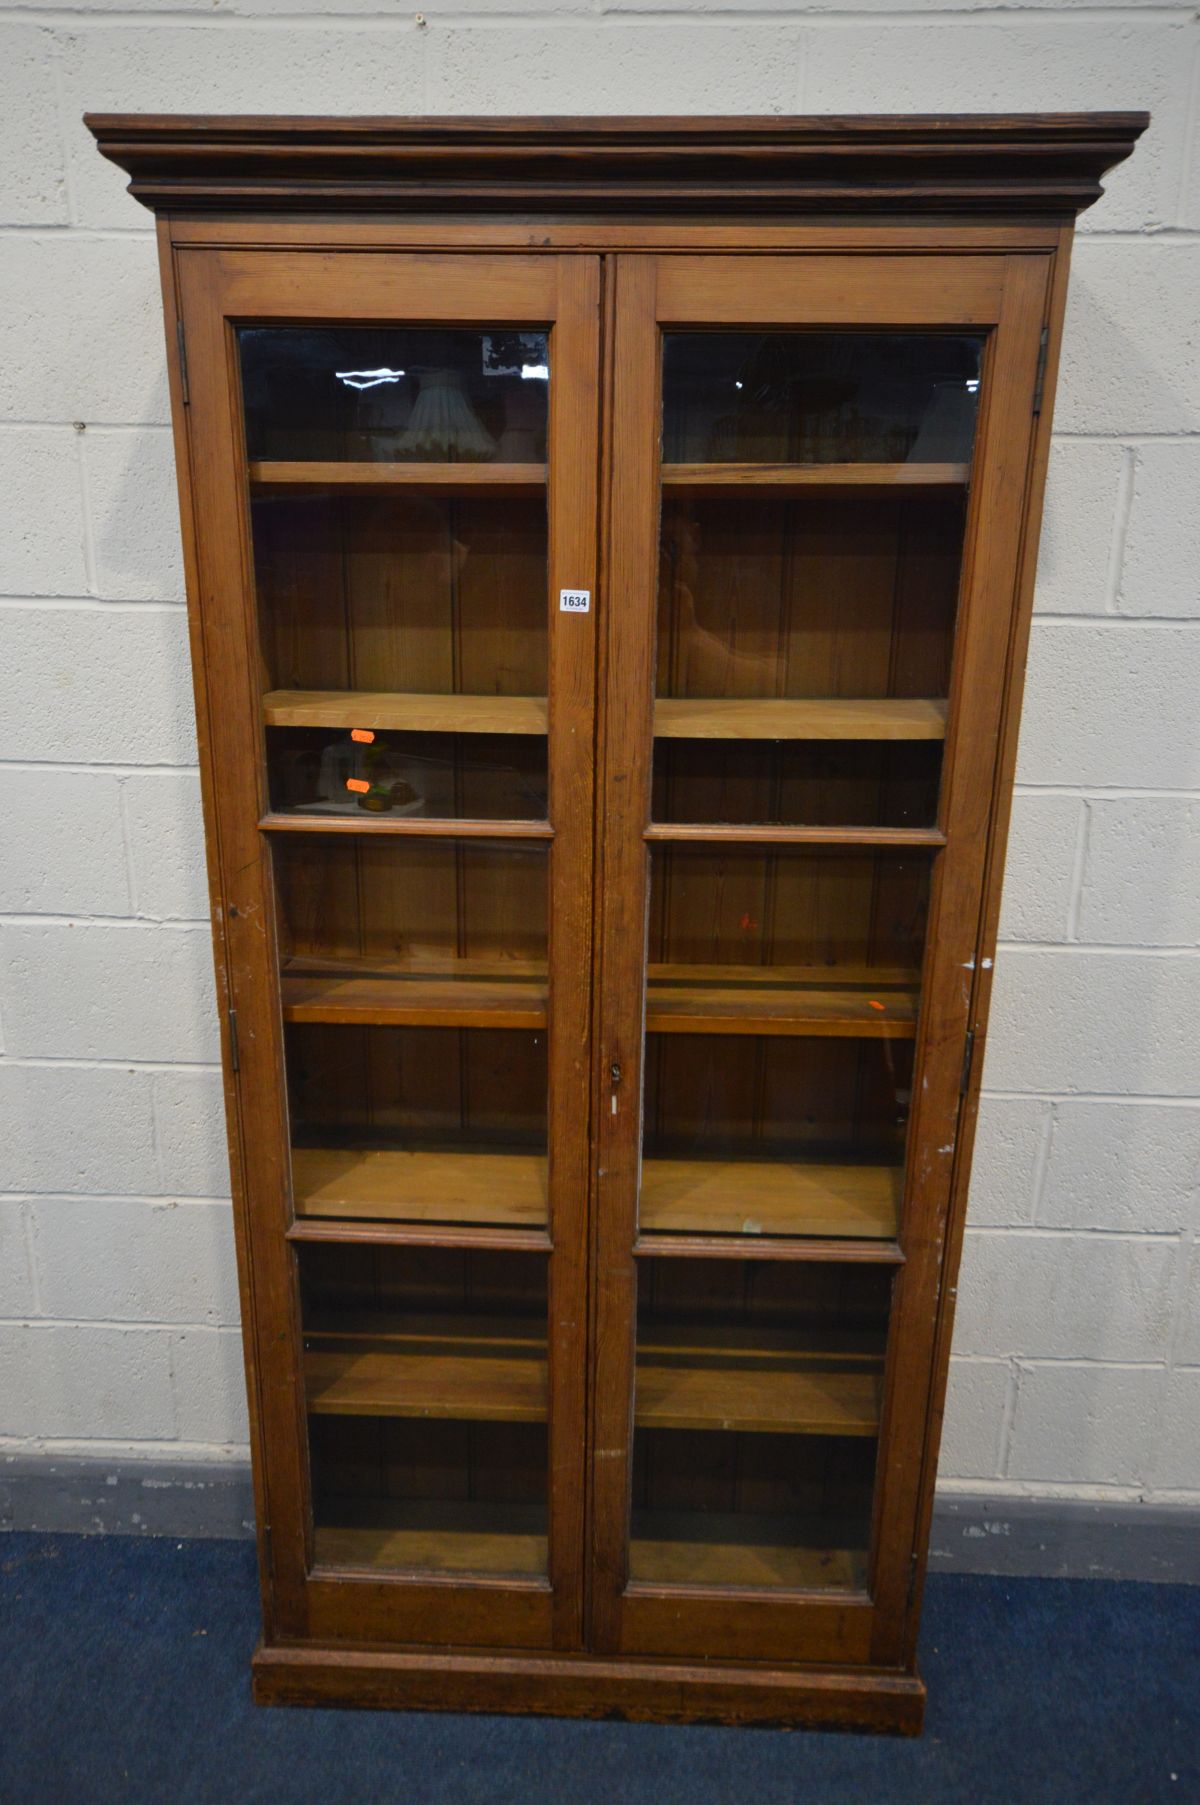 AN EARLY 20TH CENTURY PITCH PINE BOOKCASE, with double glazed doors enclosing five adjustable